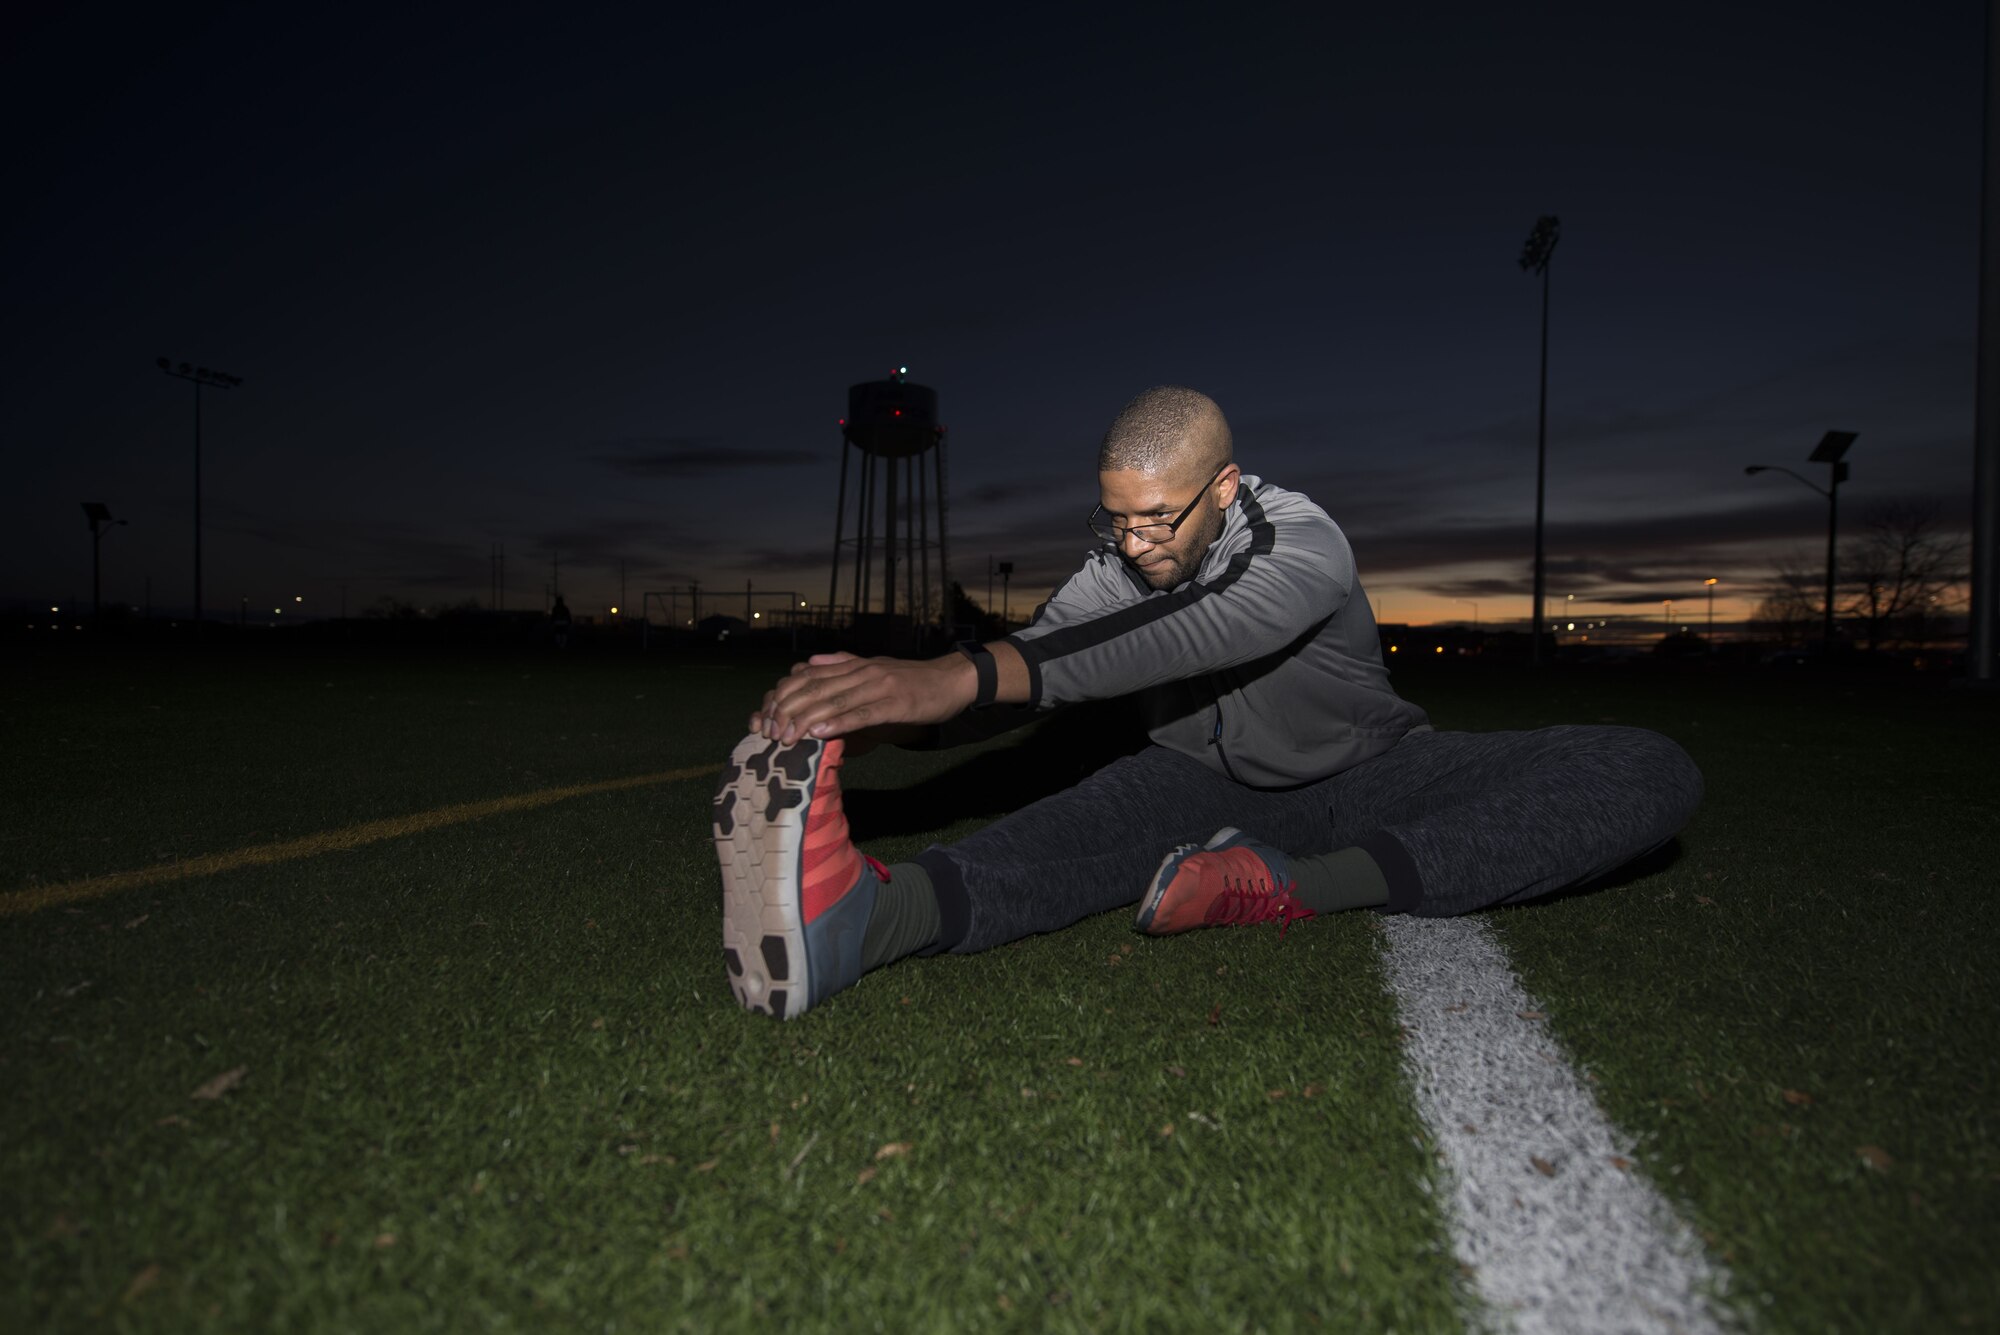 Senior Airman Joseph Amador, 366th Fighter Wing judge advocate military justice paralegal, stretches his hamstring for the Slimpossible challenge Jan. 12, 2018, at the Gunfighter Fitness Center, Mountain Home Air Force Base, Idaho. Amador performed leg stretches to cool down from his run. (U.S. Air Force photo by Airman 1st Class JaNae Capuno)